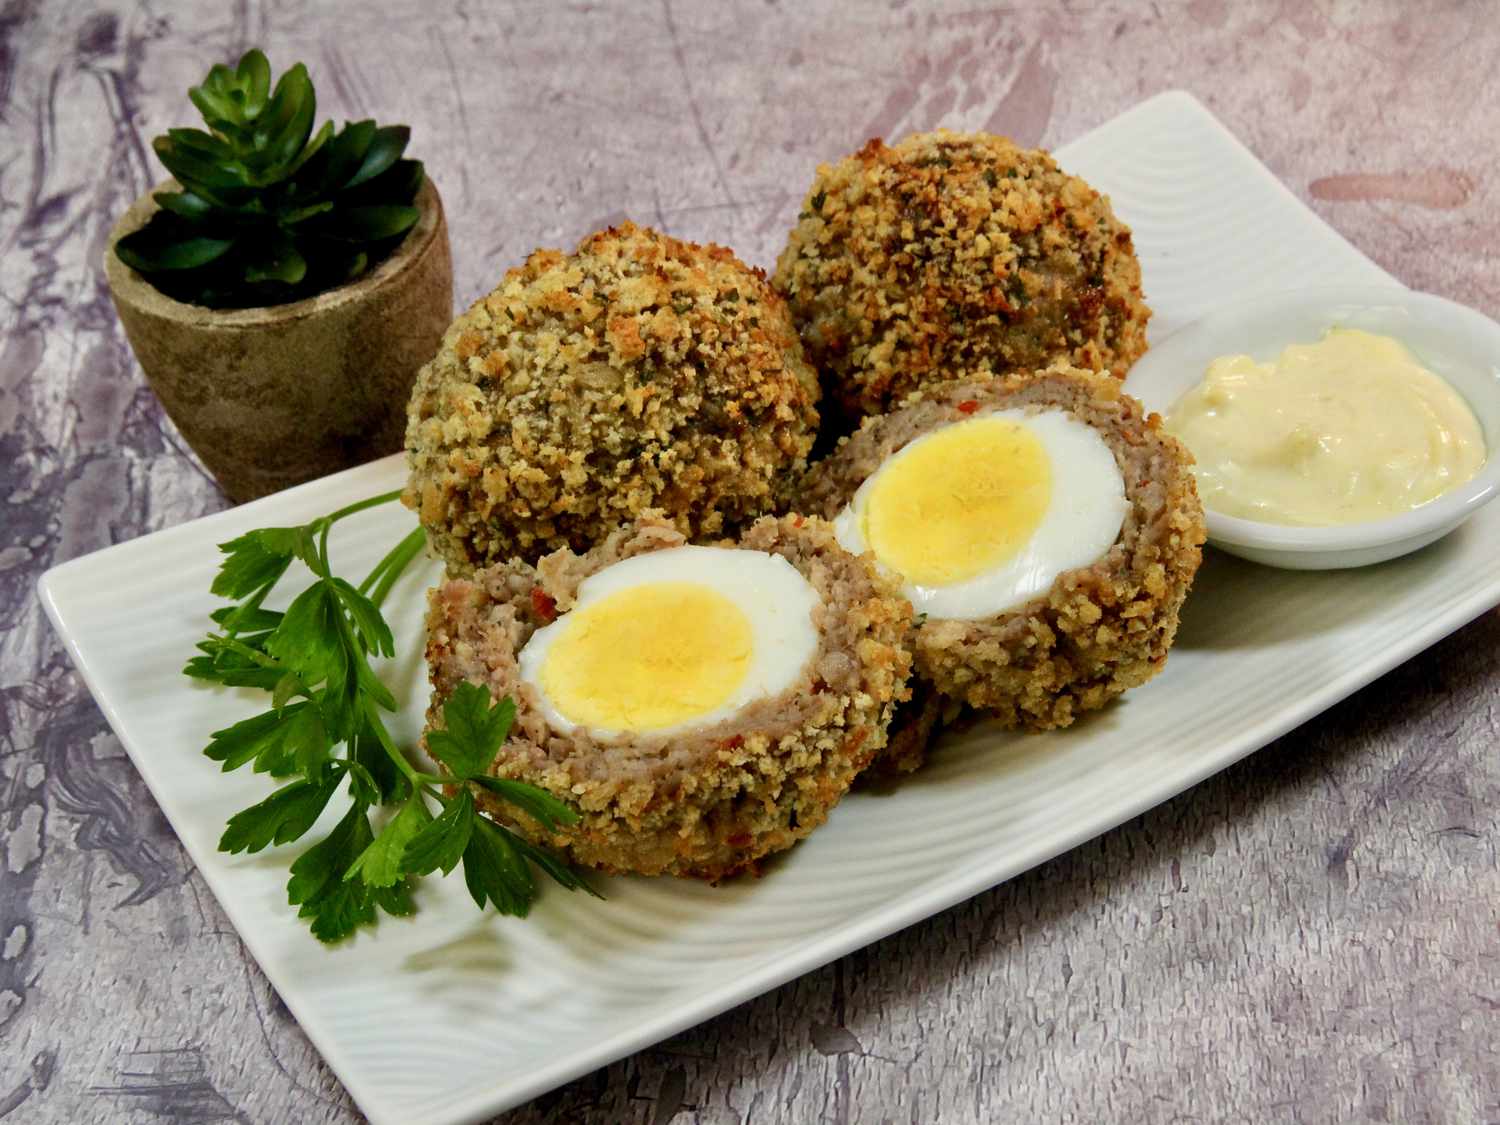 Baked Scotch Eggs: A Delicious and Nutritious Snack Option